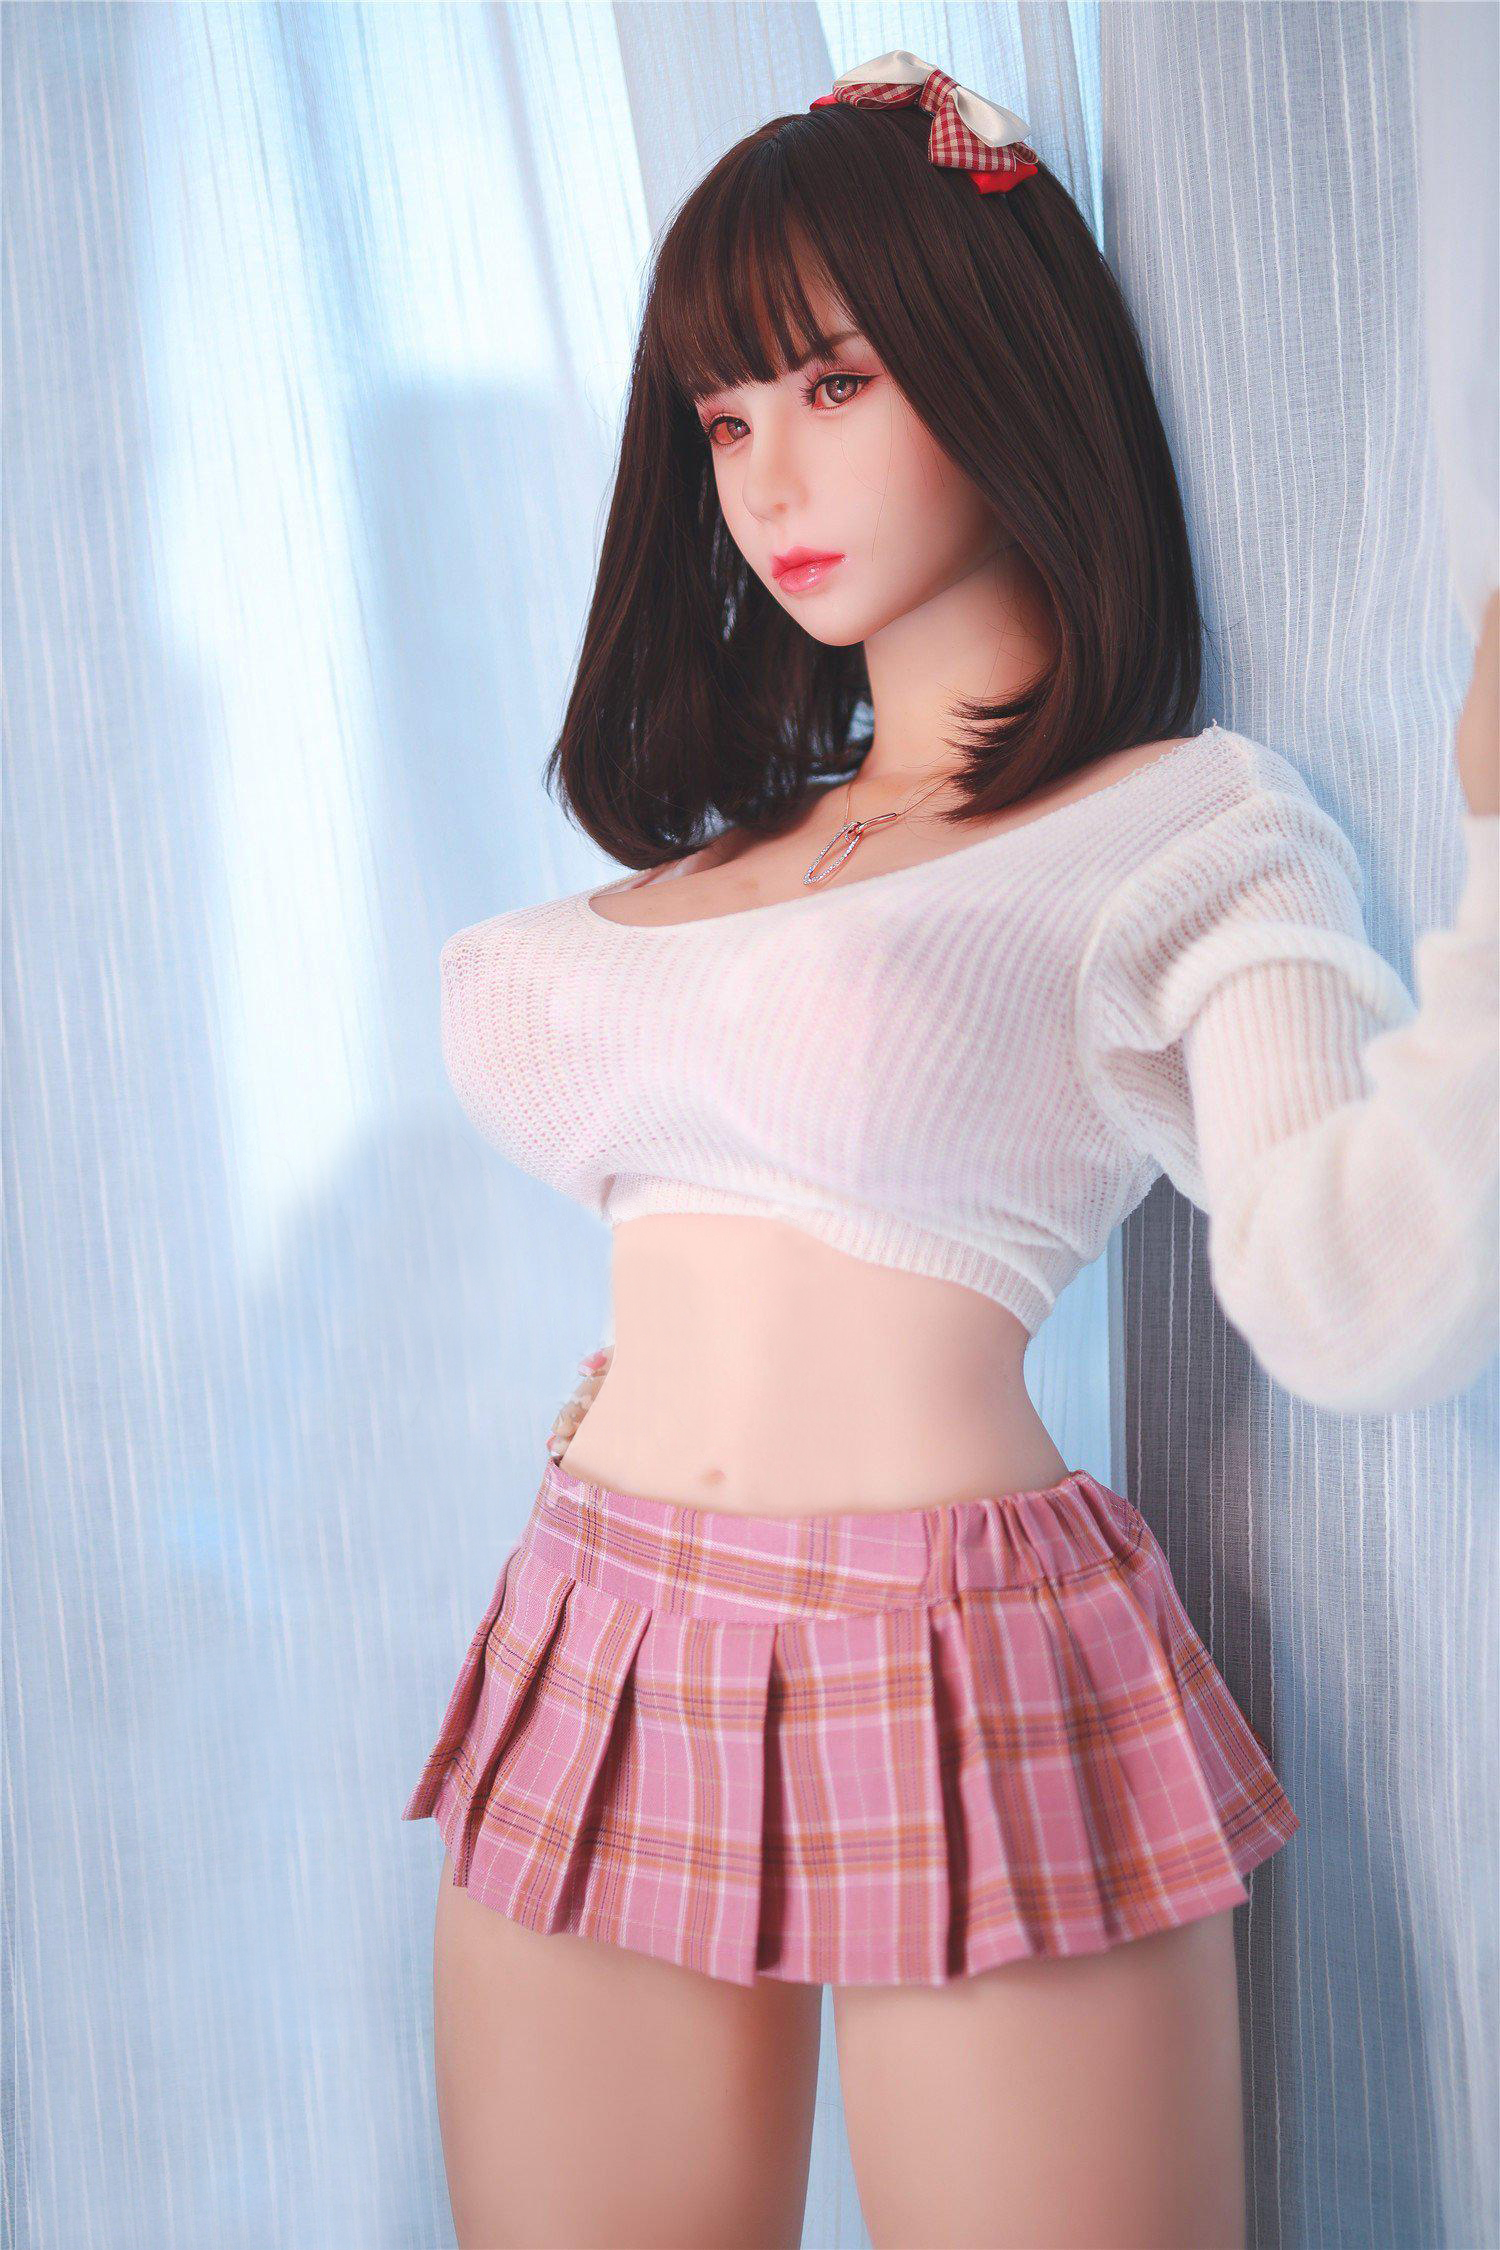 Ling-Juicy-Asian-Sex-Doll-32